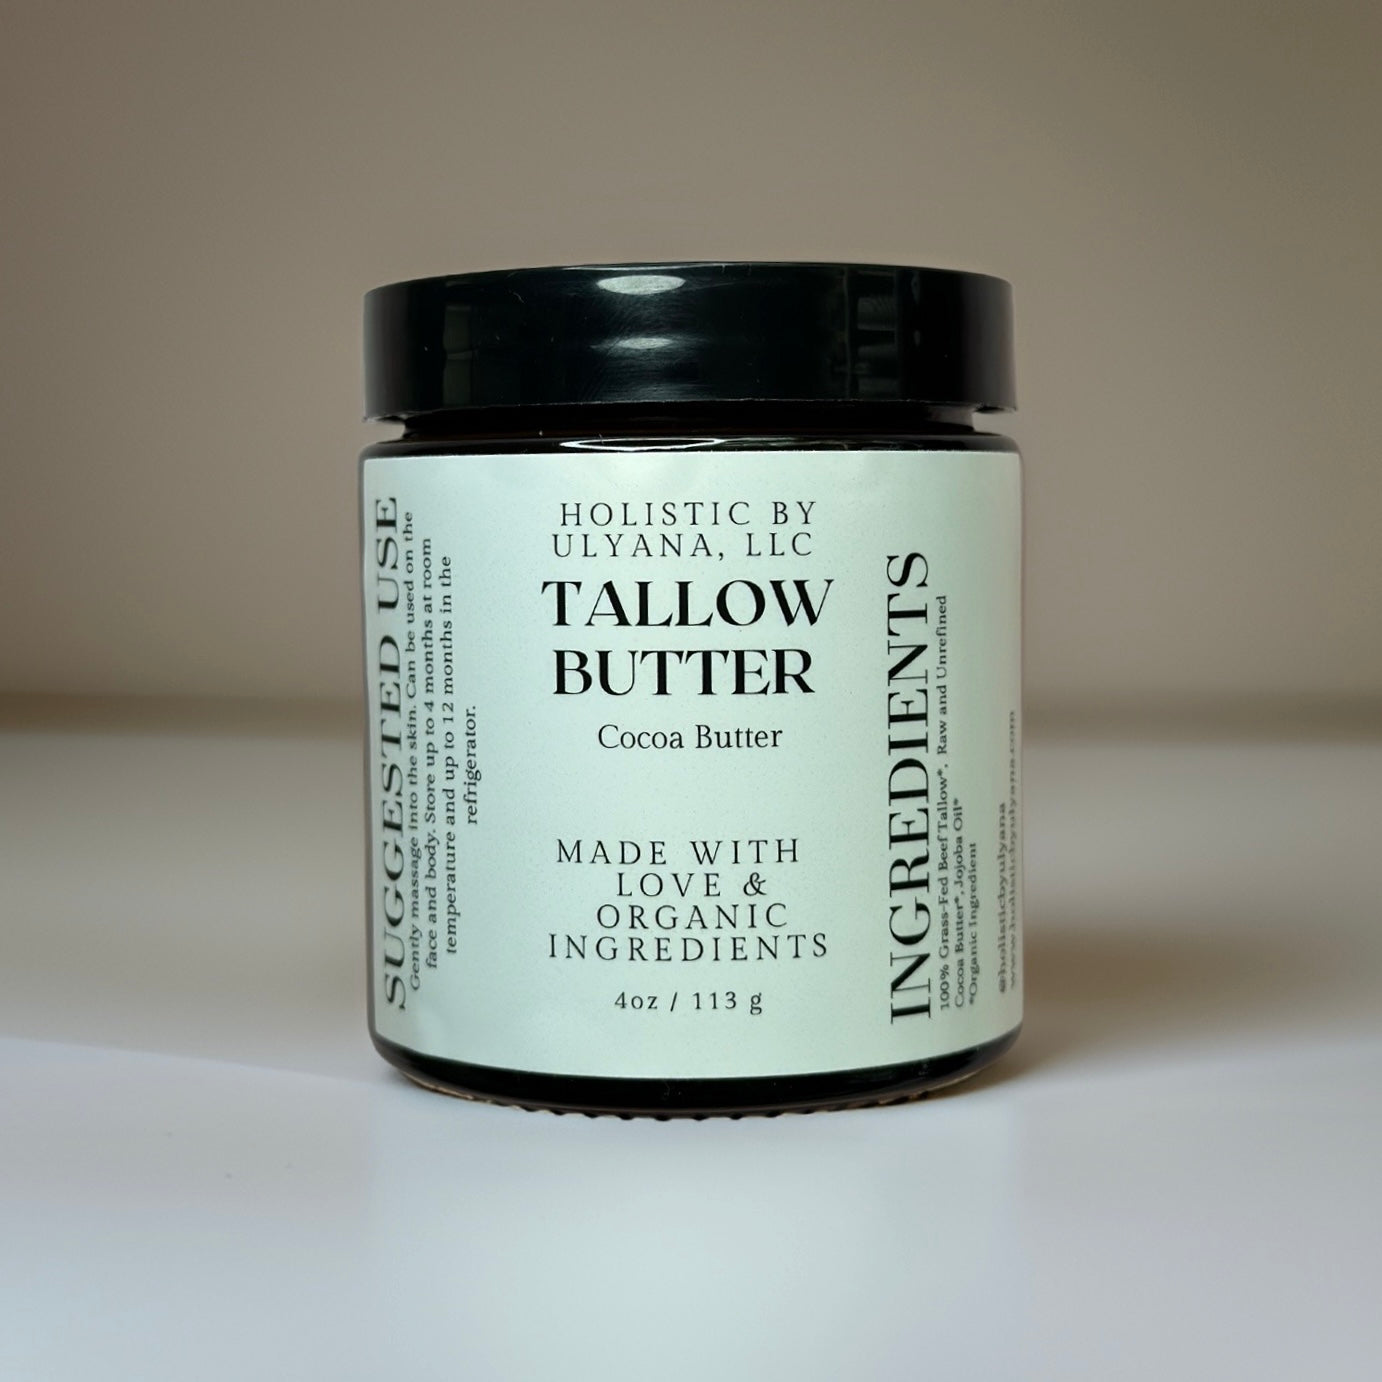 The Classic Tallow Face Butter